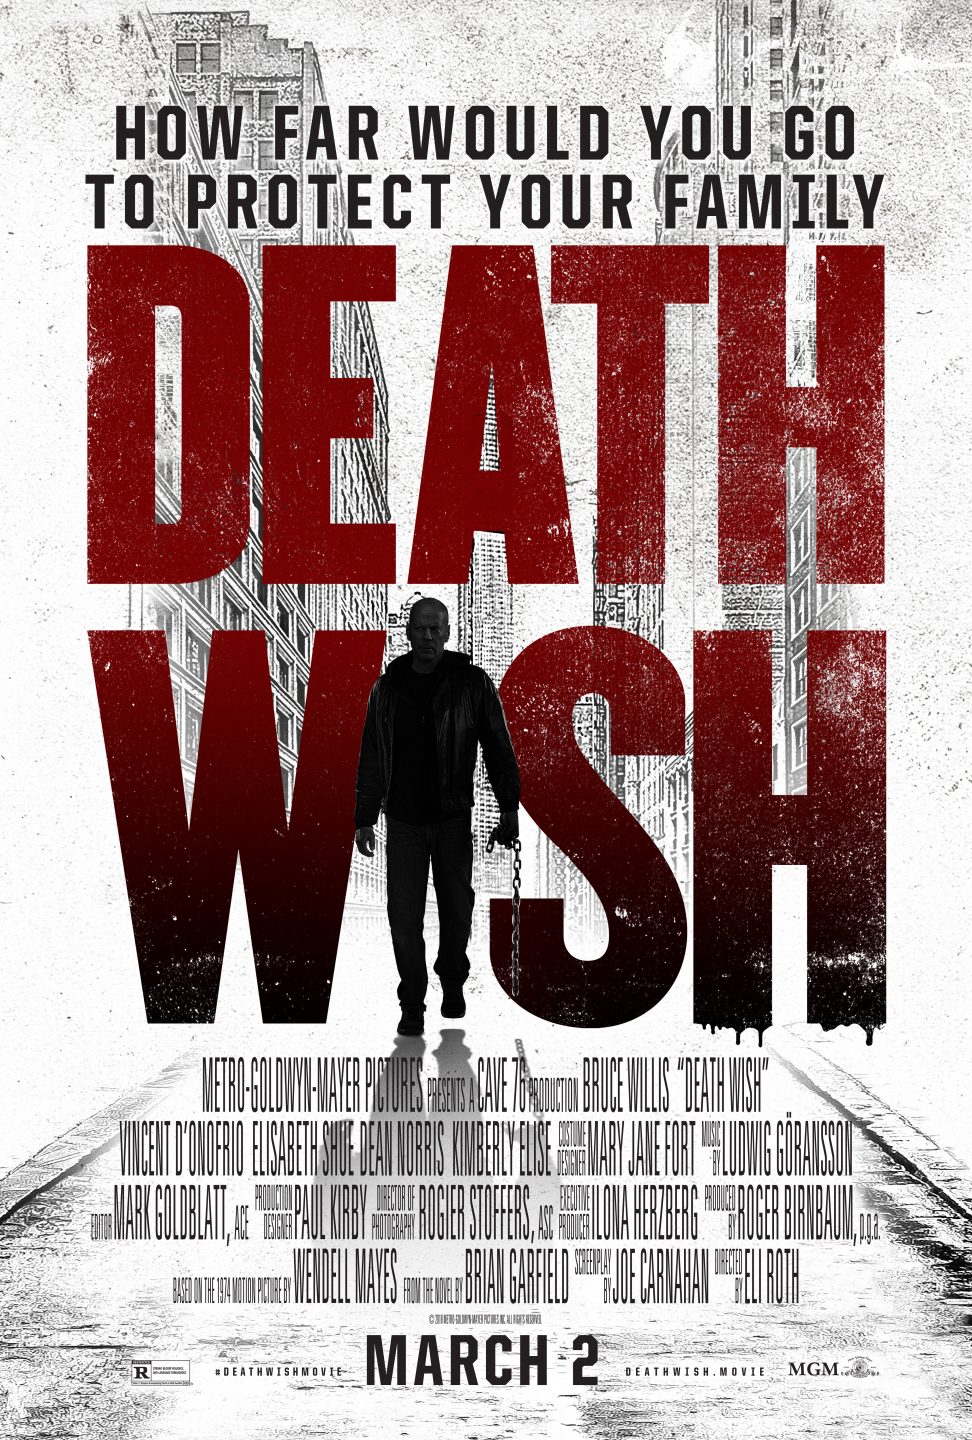 Death Wish poster (MGM Pictures)